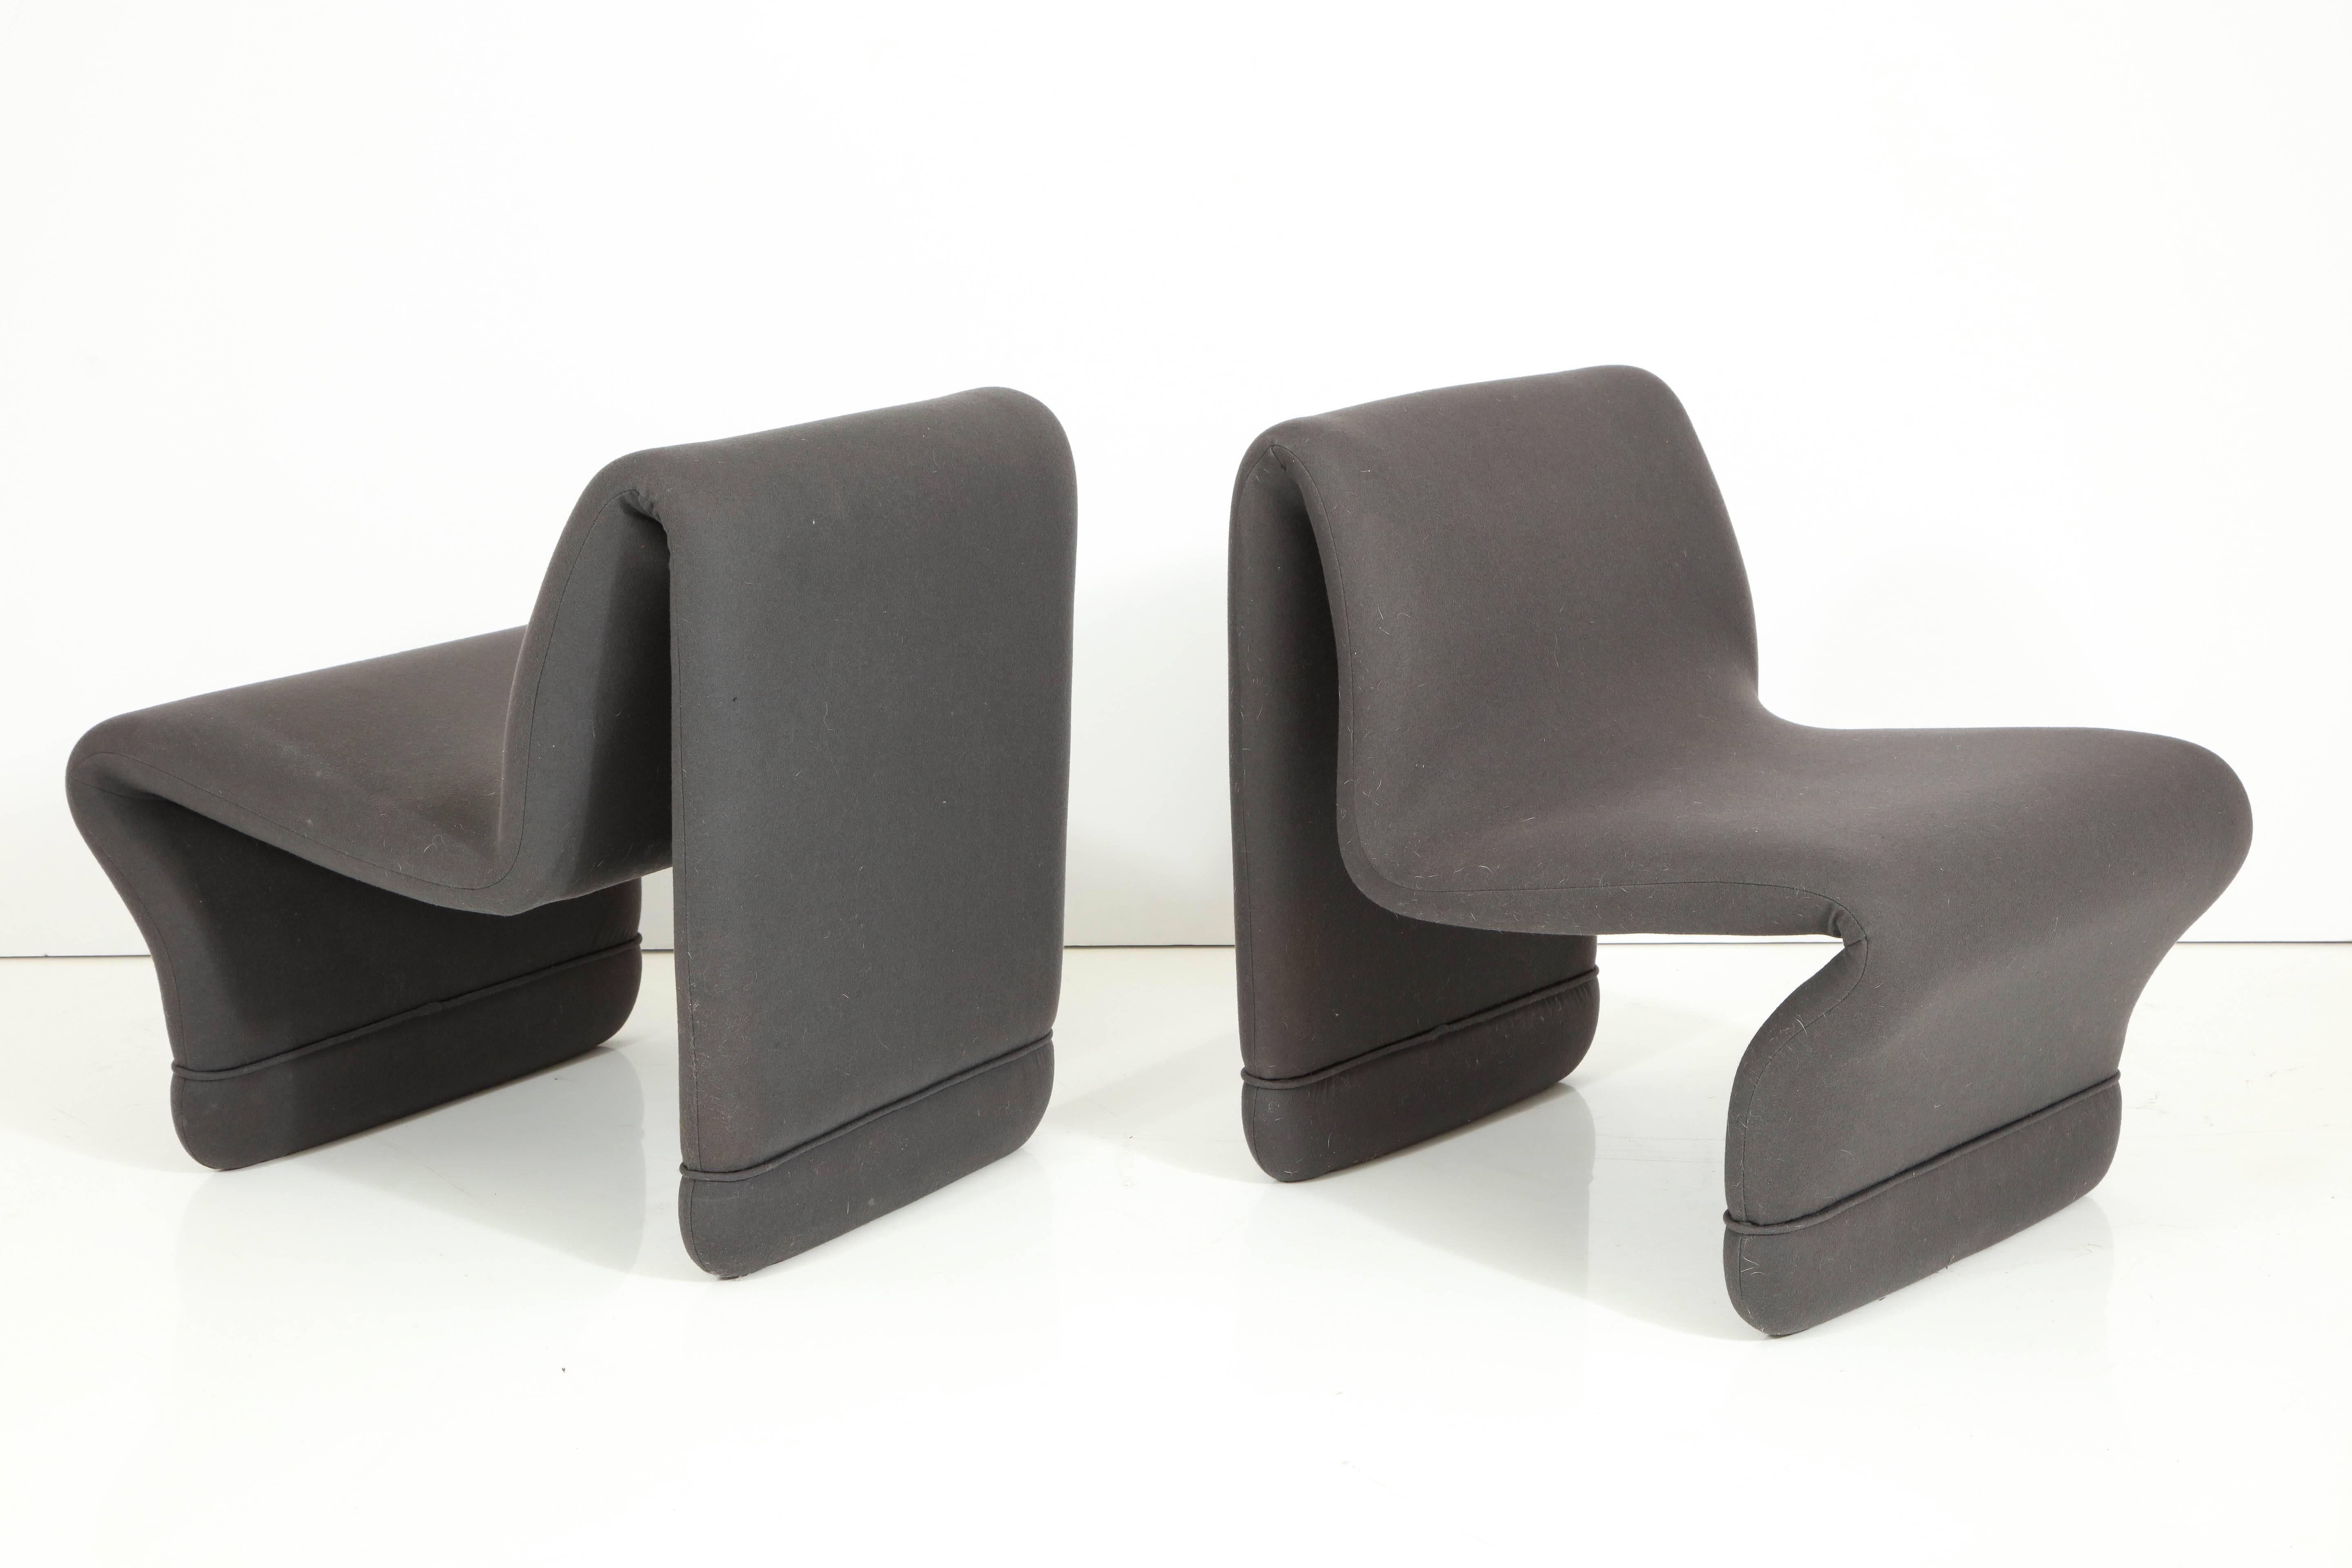 Pair of 1960s chairs designed by Olivia Morgue.
The chairs have recently been reupholstered in a grey wool fabric.